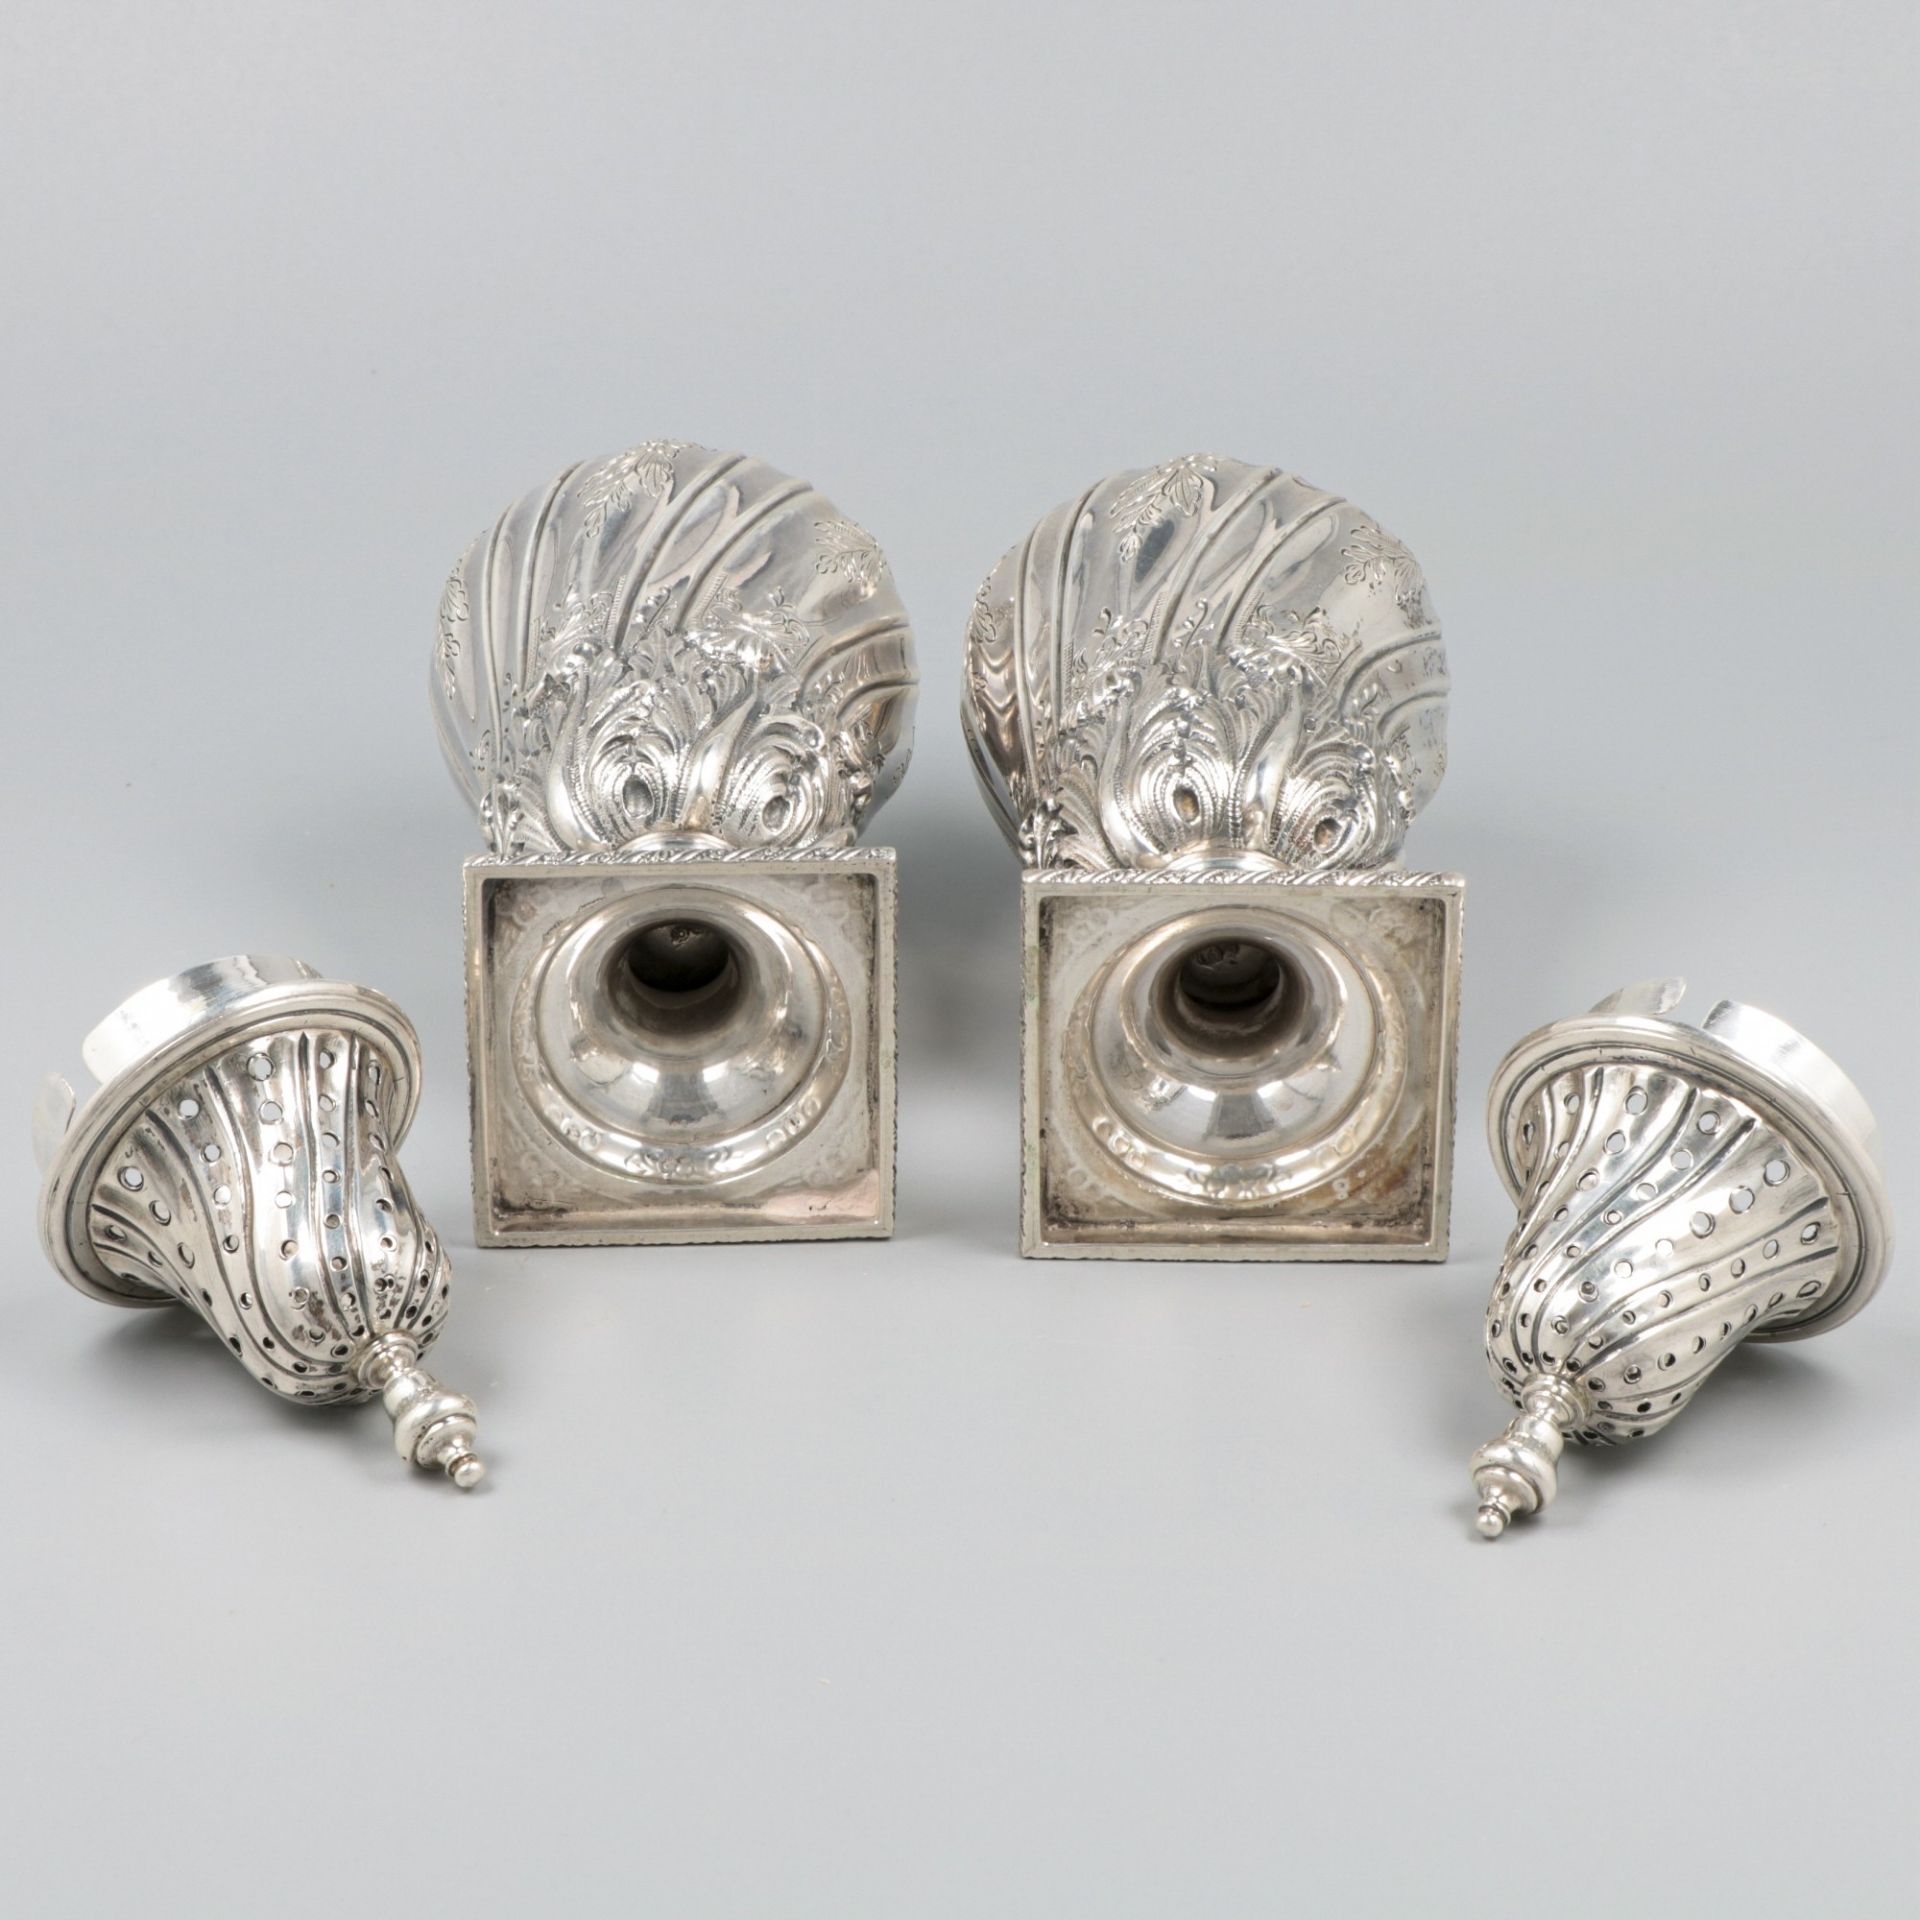 2-piece set of silver casters. - Image 6 of 7